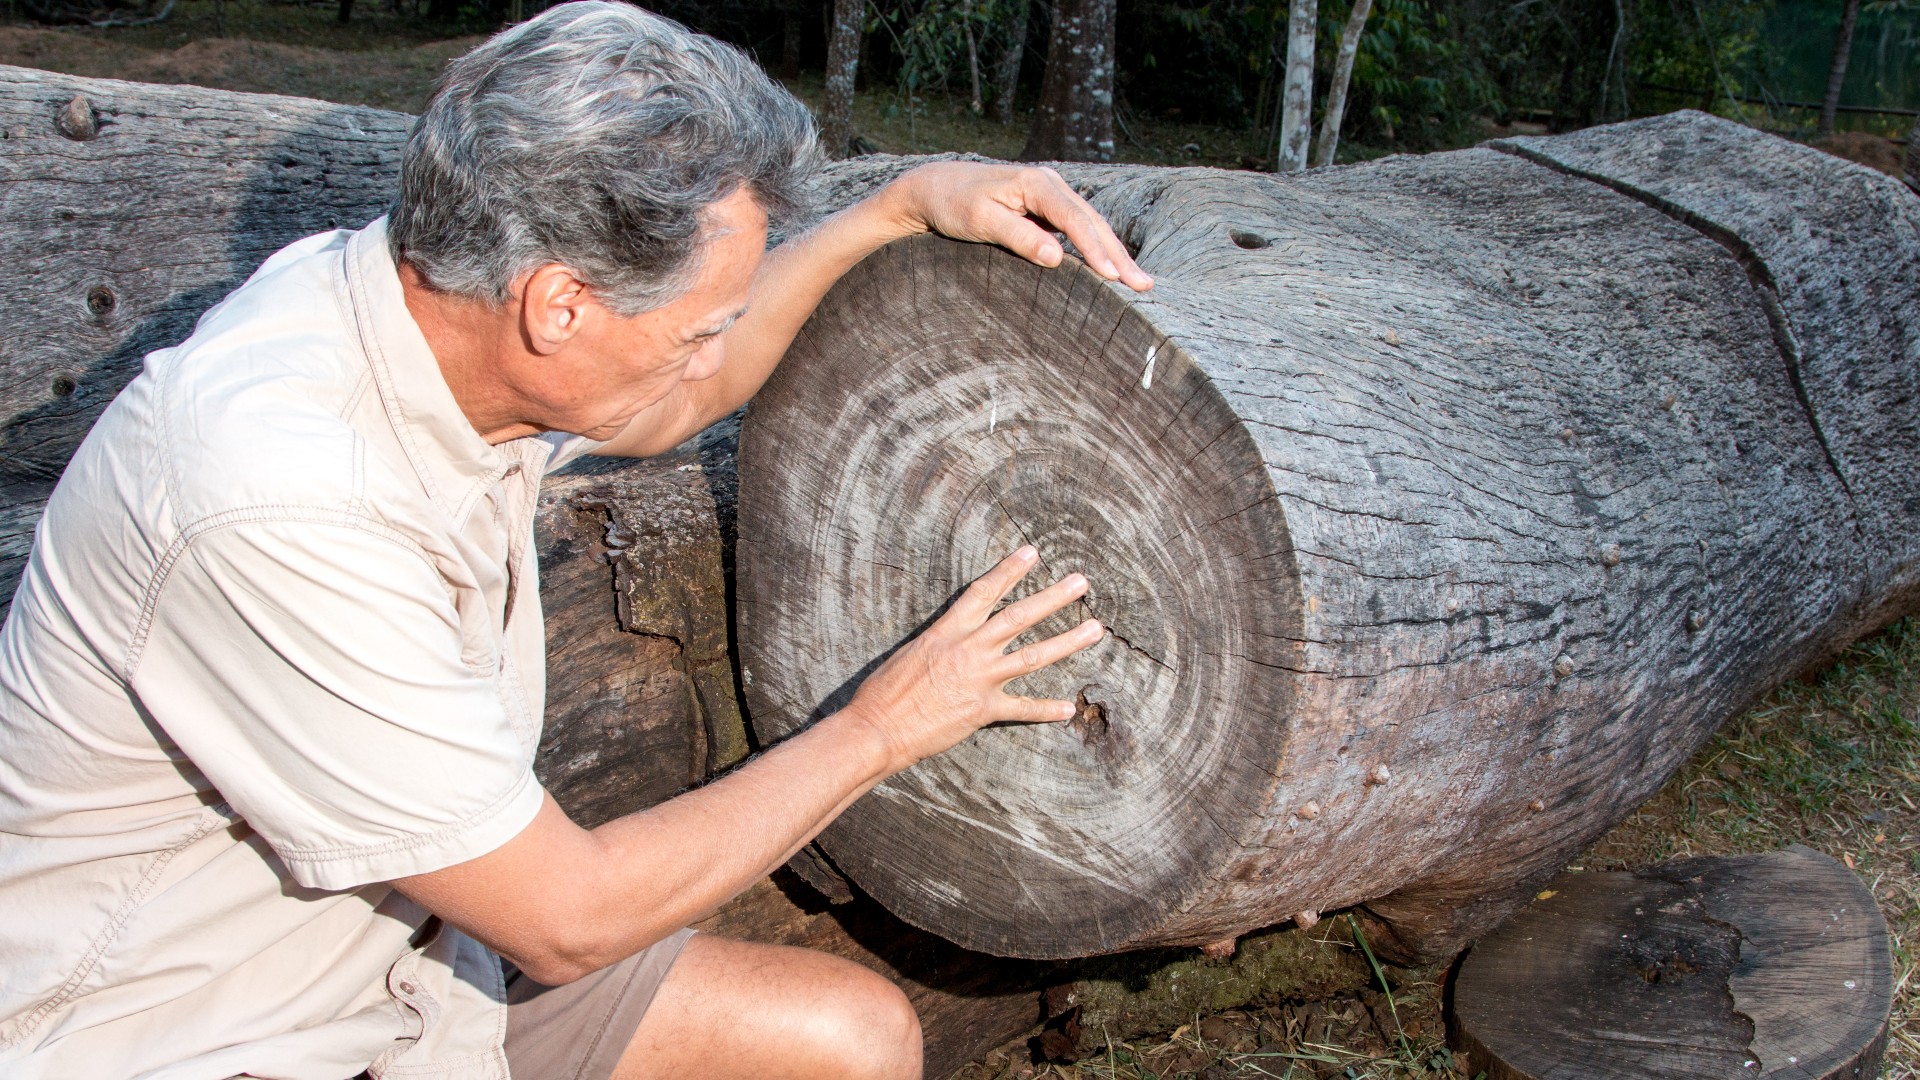 Here we see a man inspecting the growth rings of a felled tree to find out how old the tree is.